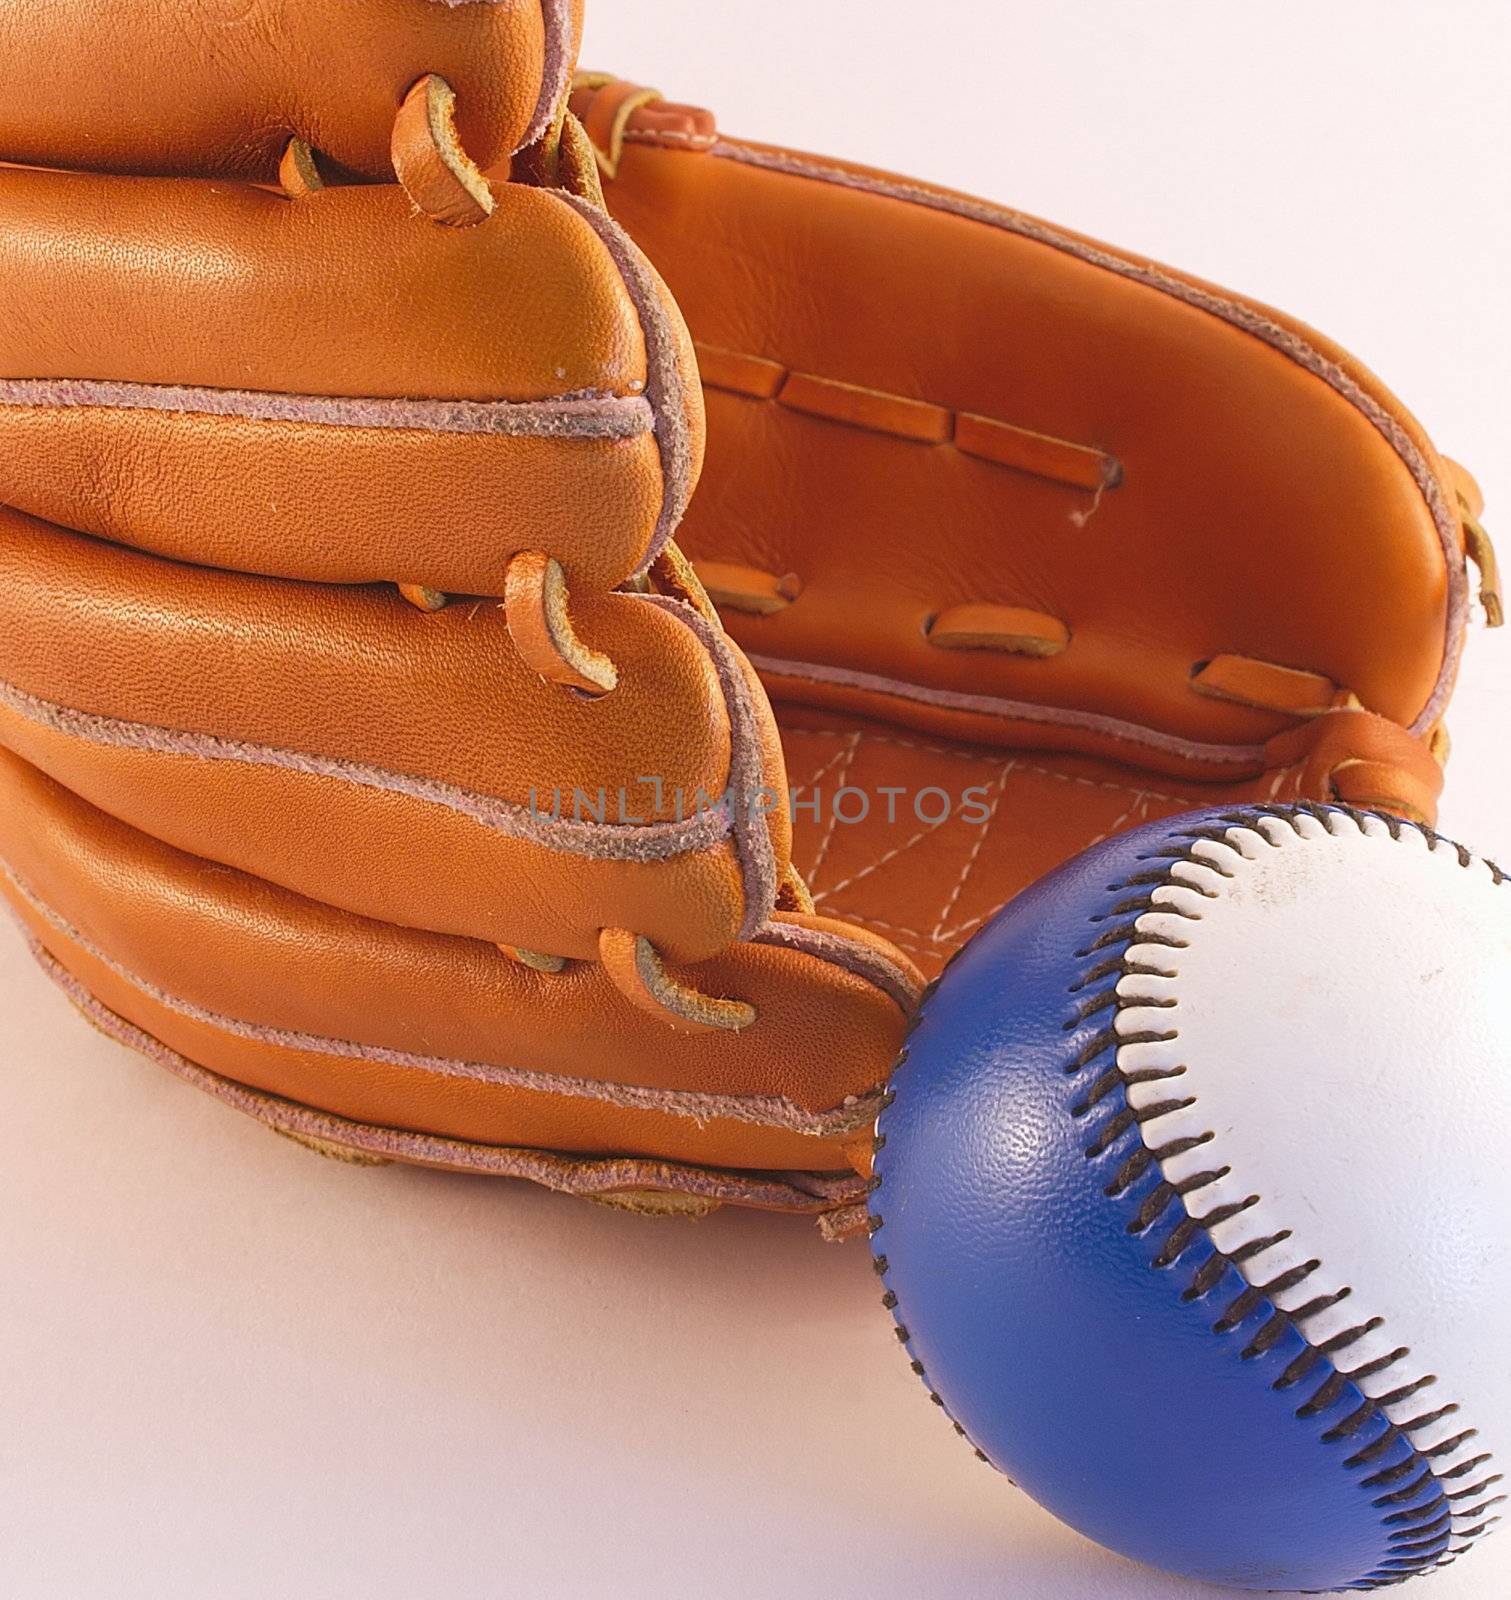 baseball and glove by leafy